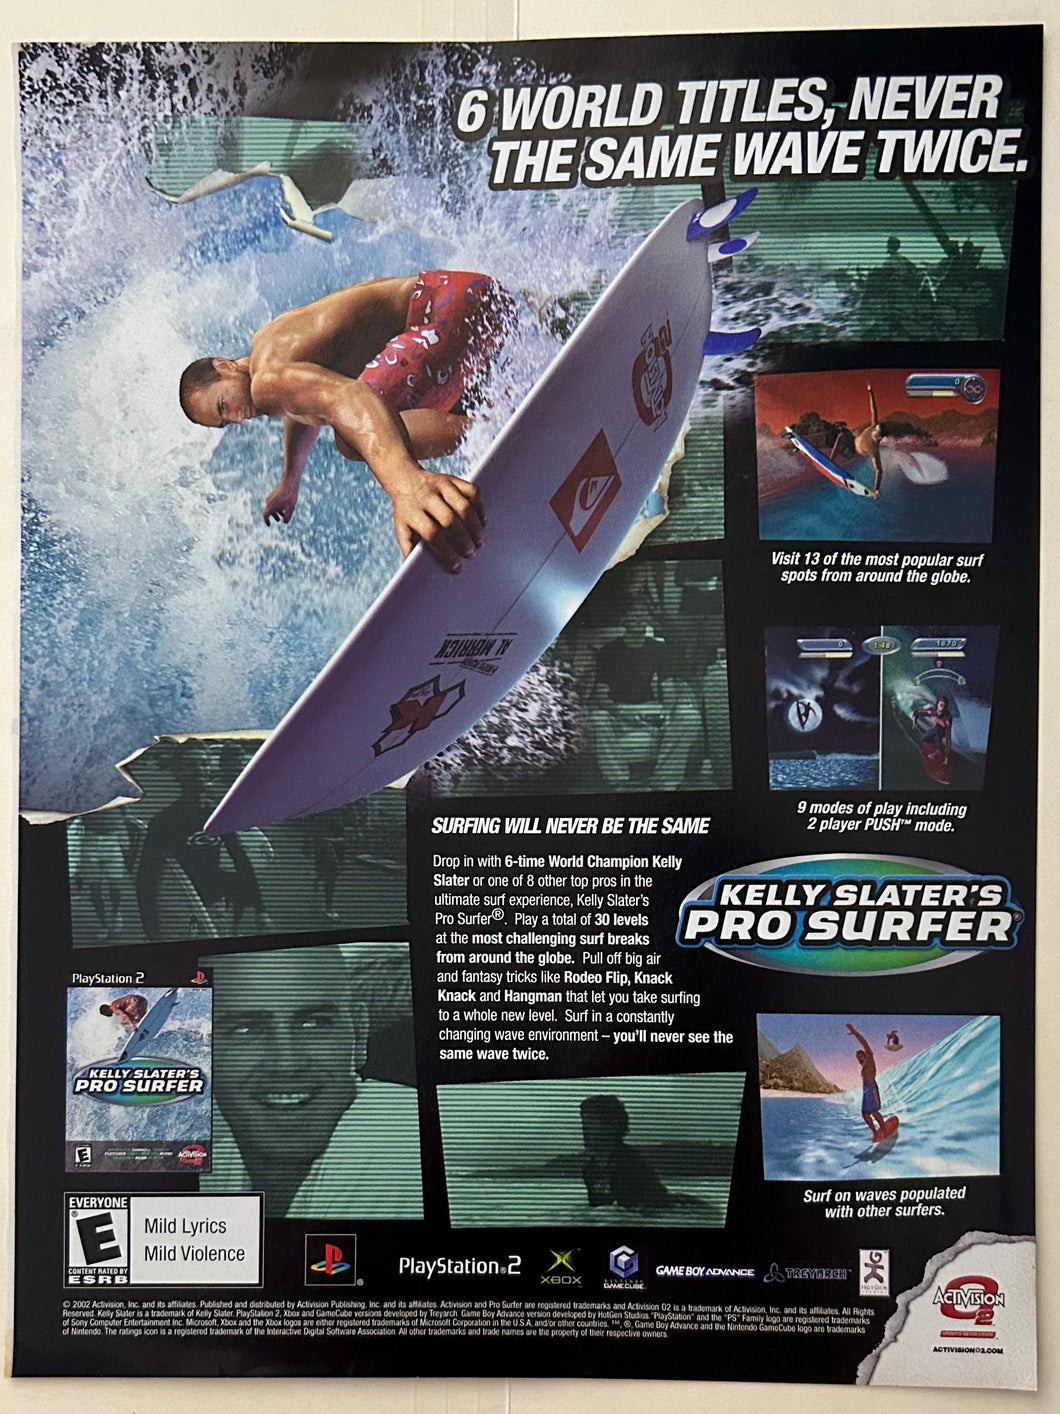 Kelly Slater’s Pro Surfer - PS2 NGC Xbox GBA - Original Vintage Advertisement - Print Ads - Laminated A4 Poster